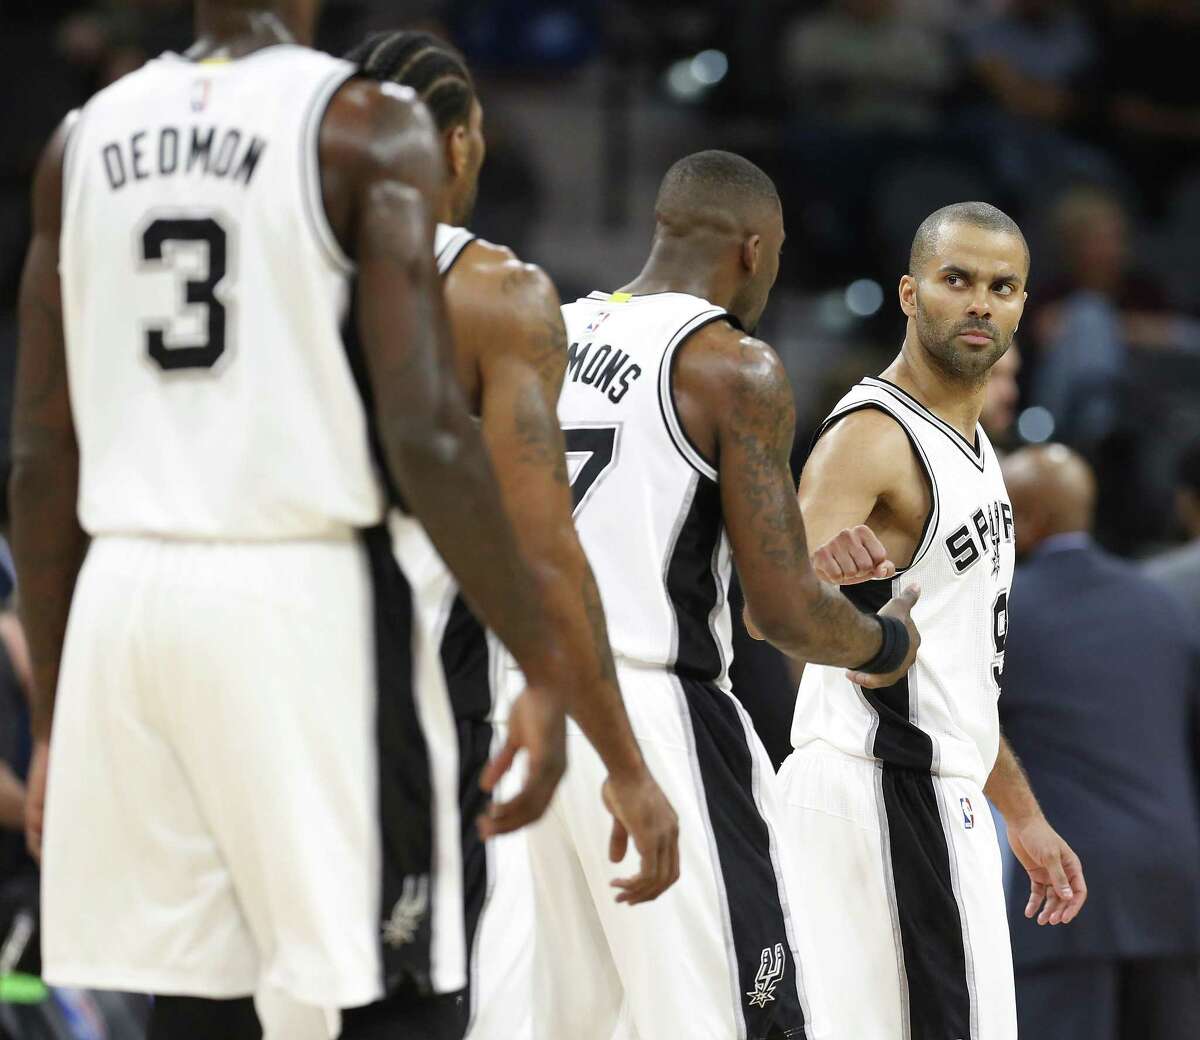 Spurs’ Tony Parker (9) looks back his his teammates during the game against the Memphis Grizzlies at the AT&T Center on April 4, 2017.